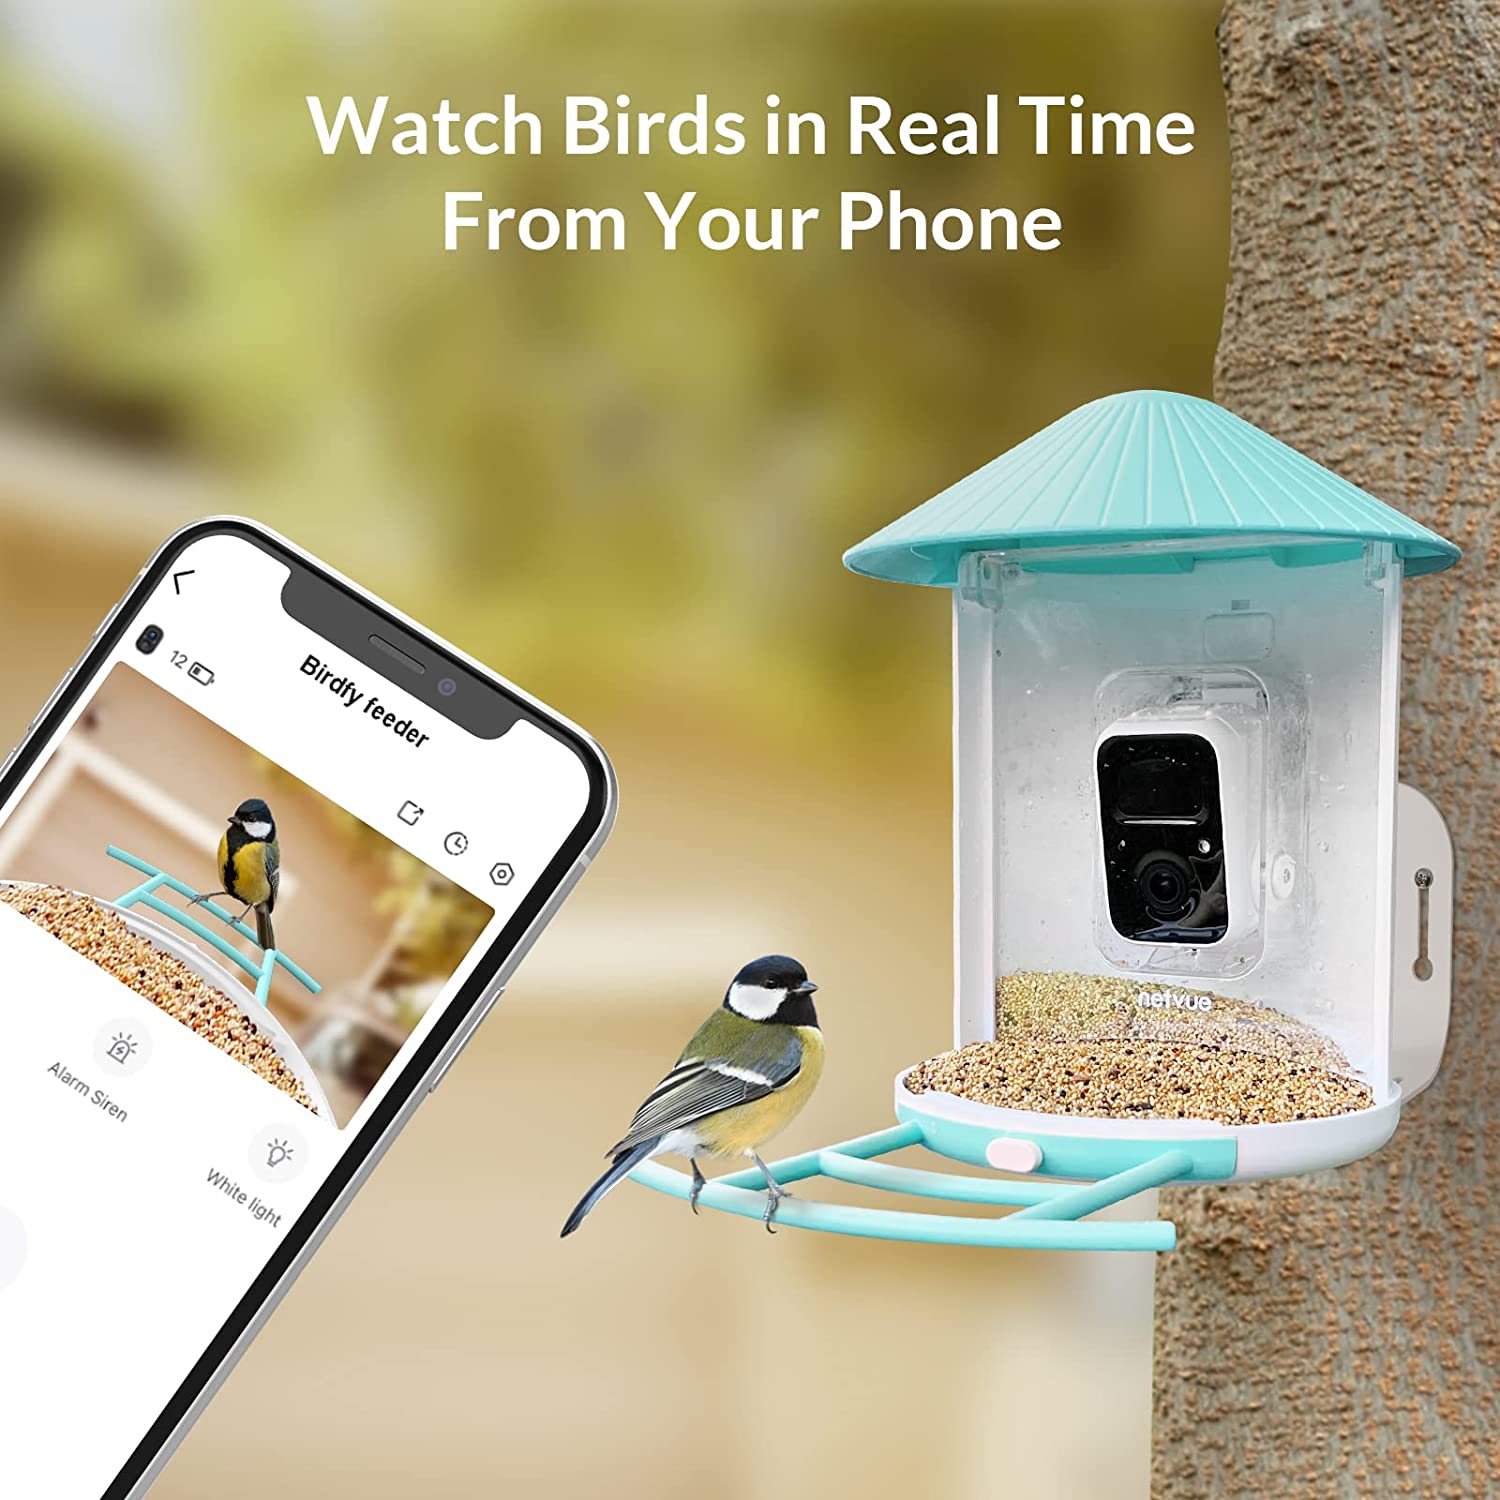 A smart bird feeder attached to a tree. There is another image of a cell phone showing the captured image. There is text which says, 'Watch birds in real time from your phone.'